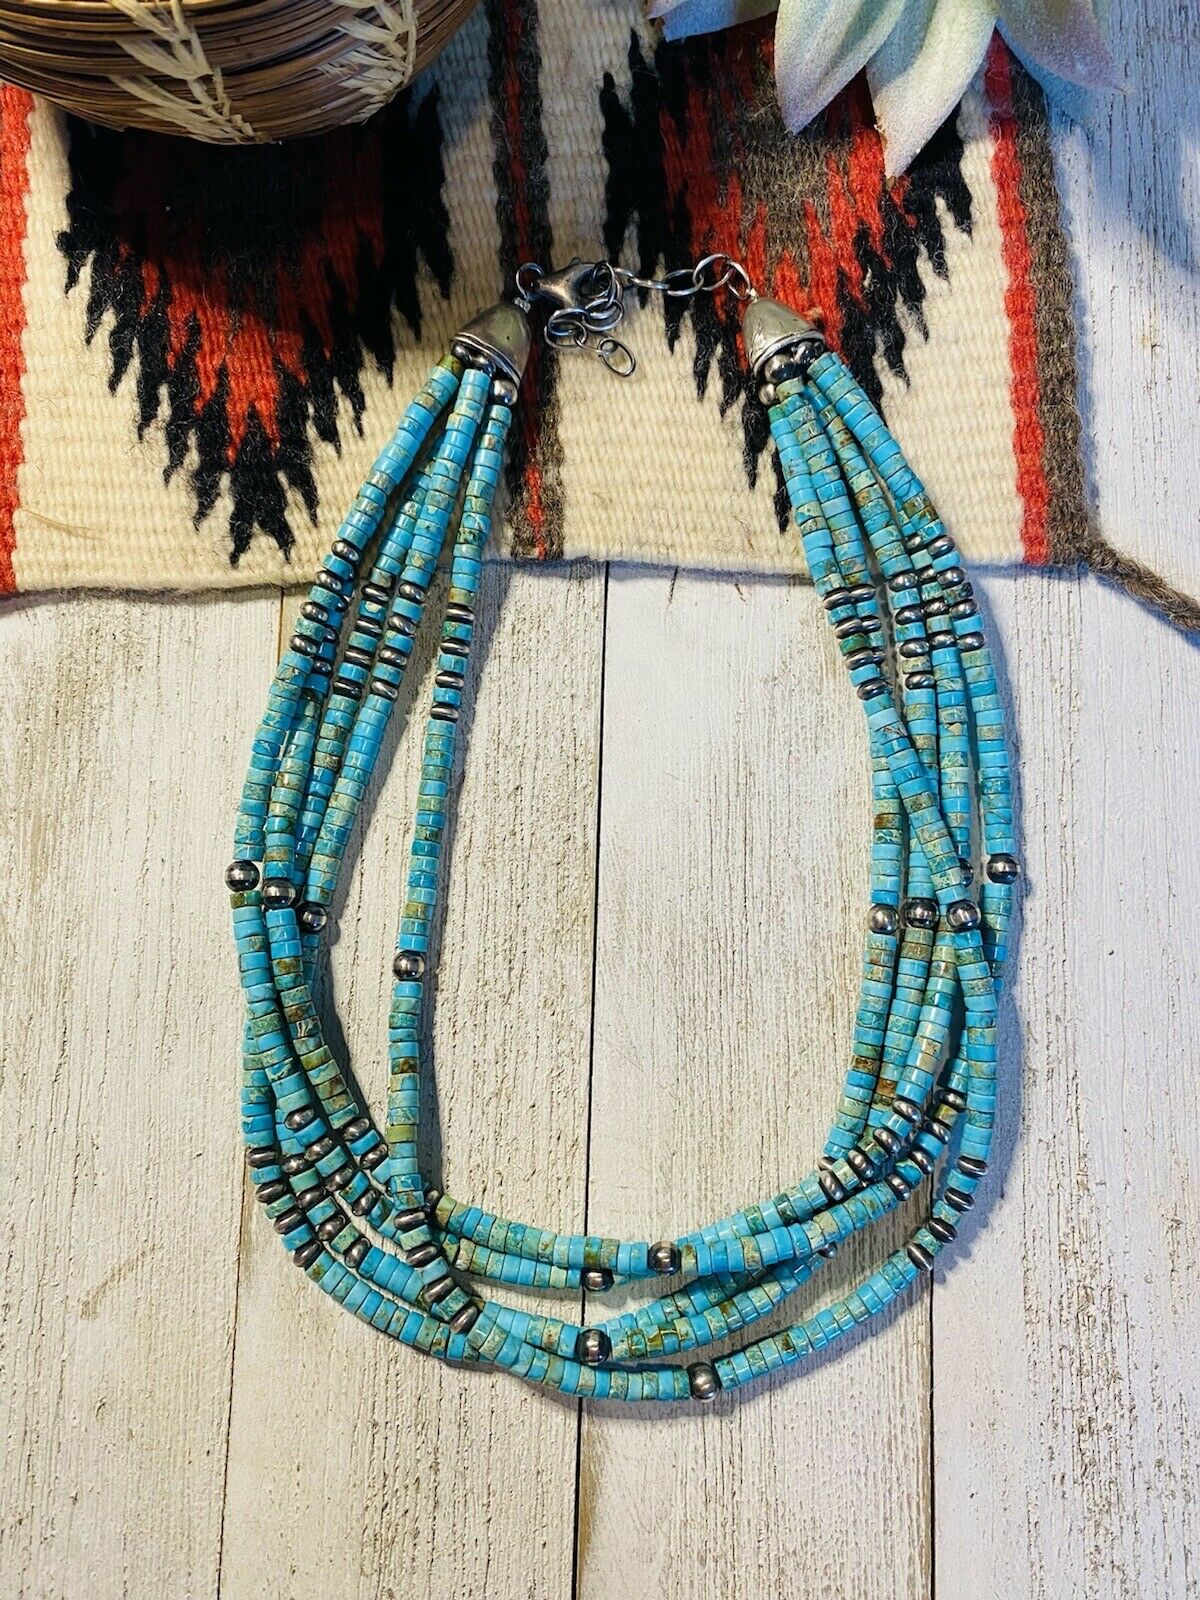 Navajo Turquoise & Sterling Silver Beaded 5 Strand Beaded Necklace